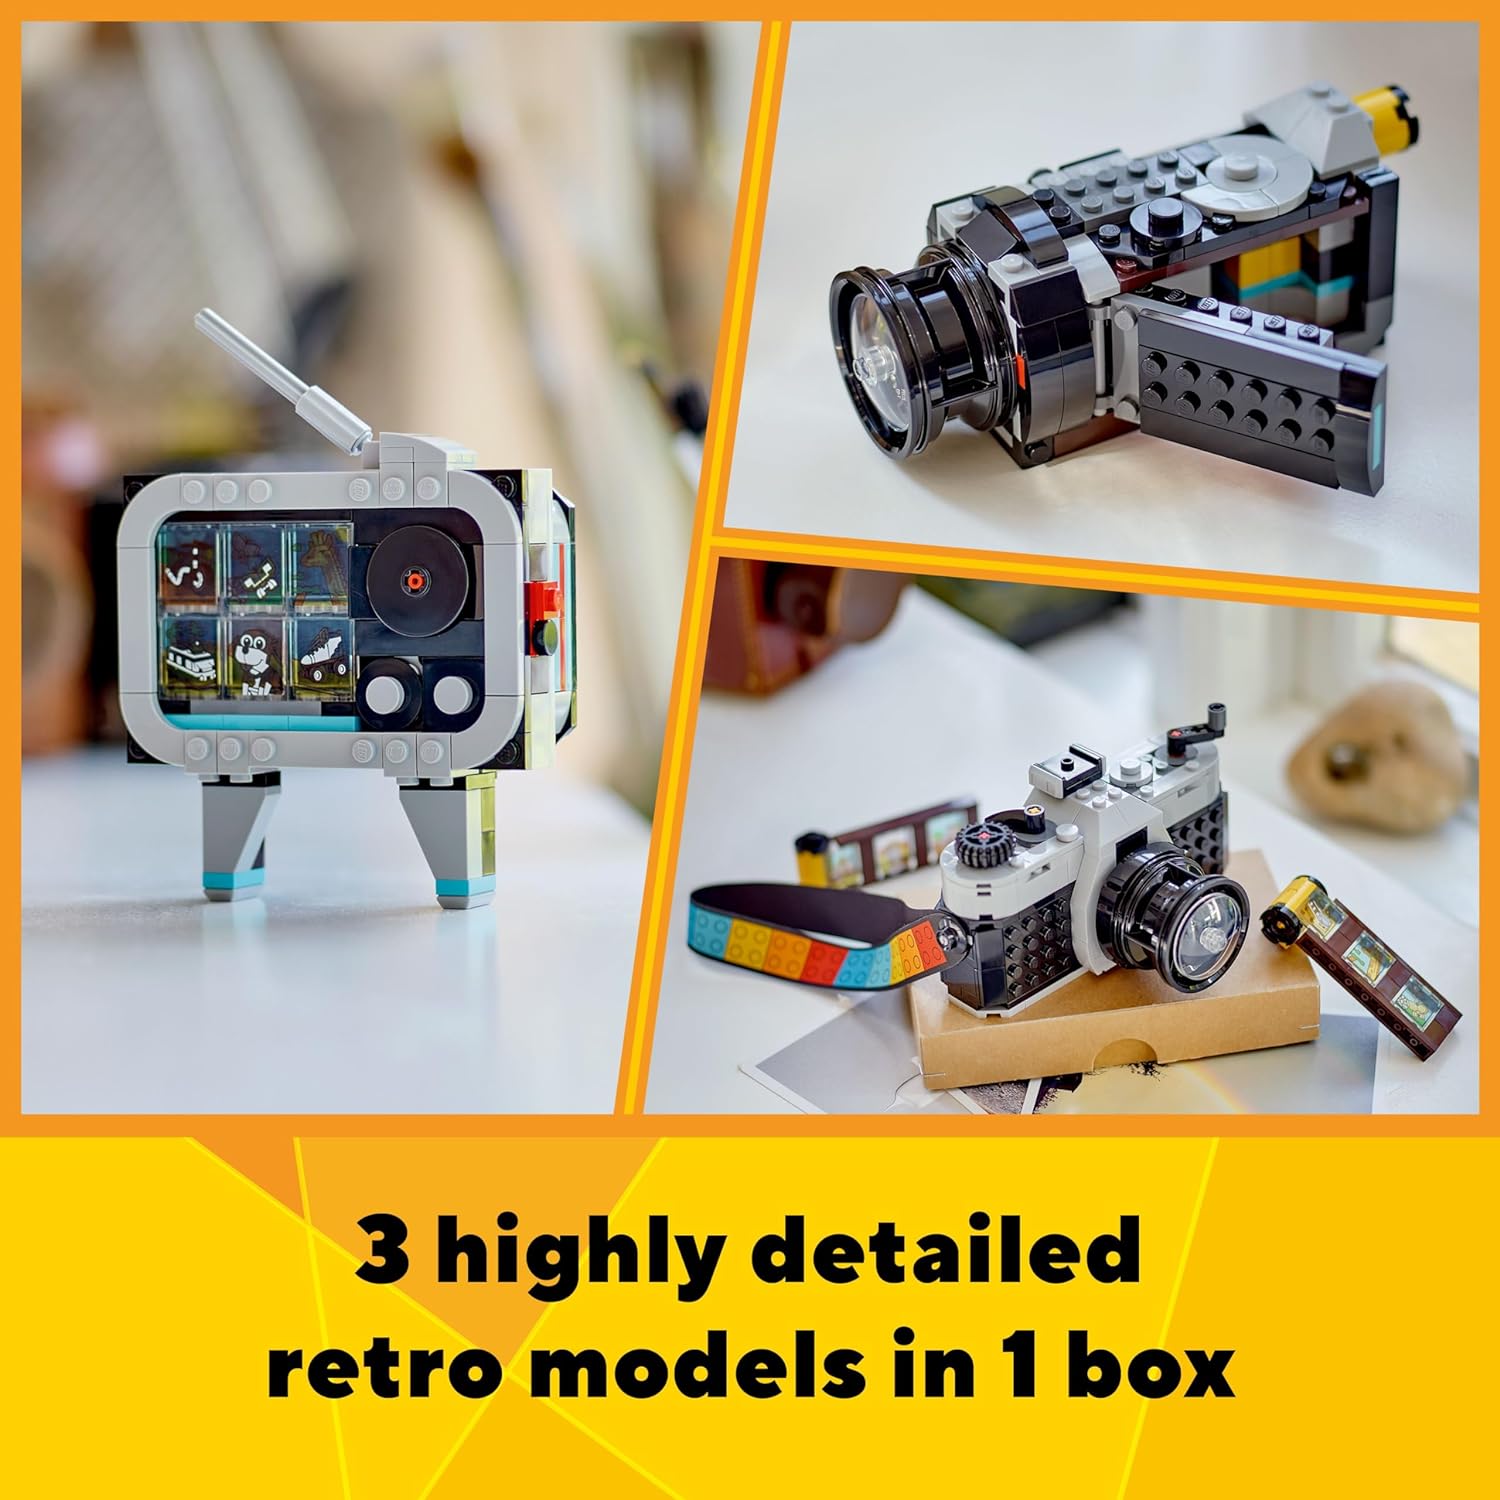 LEGO Creator 3in1 Retro Camera Building Kit for Ages 8+